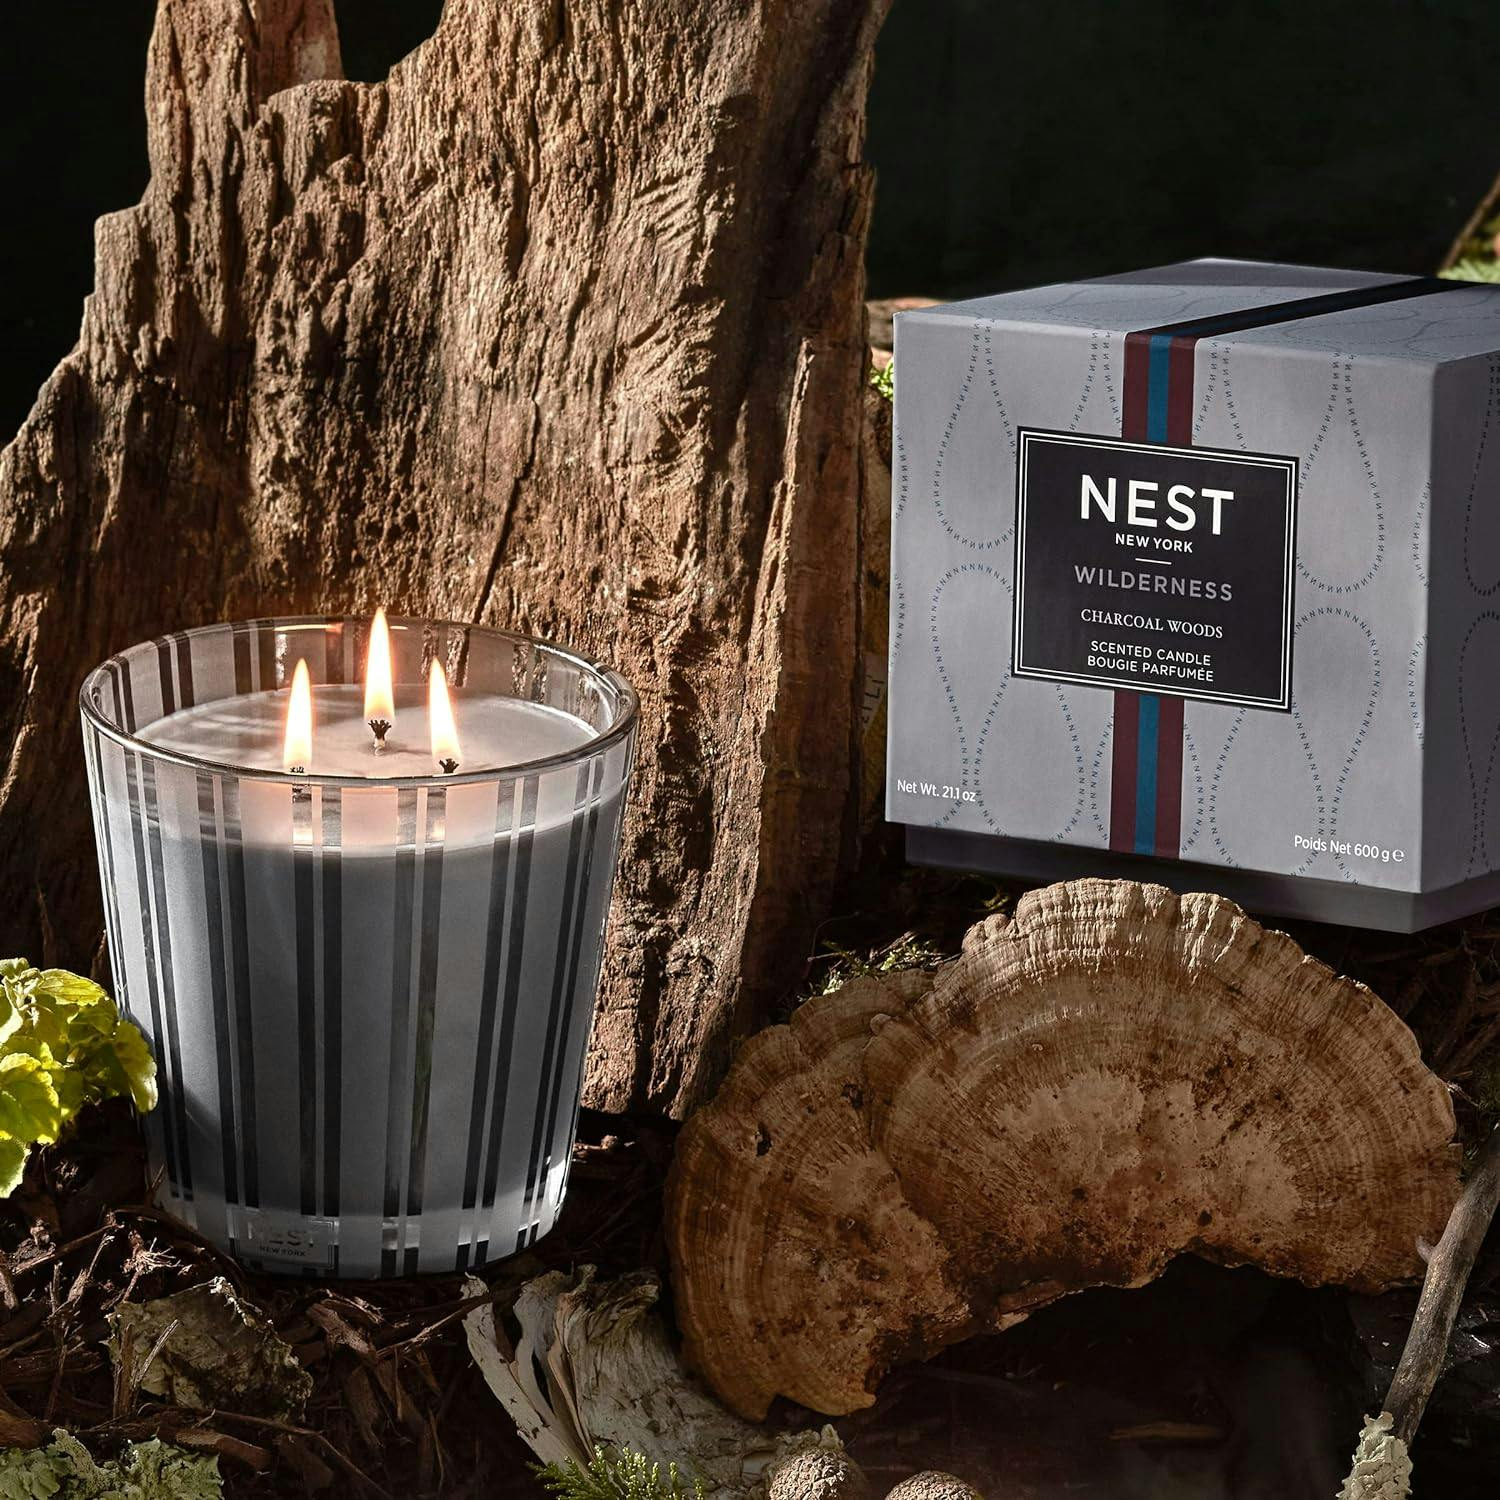 Charcoal Woods Elegance 3-Wick Scented Soy Candle